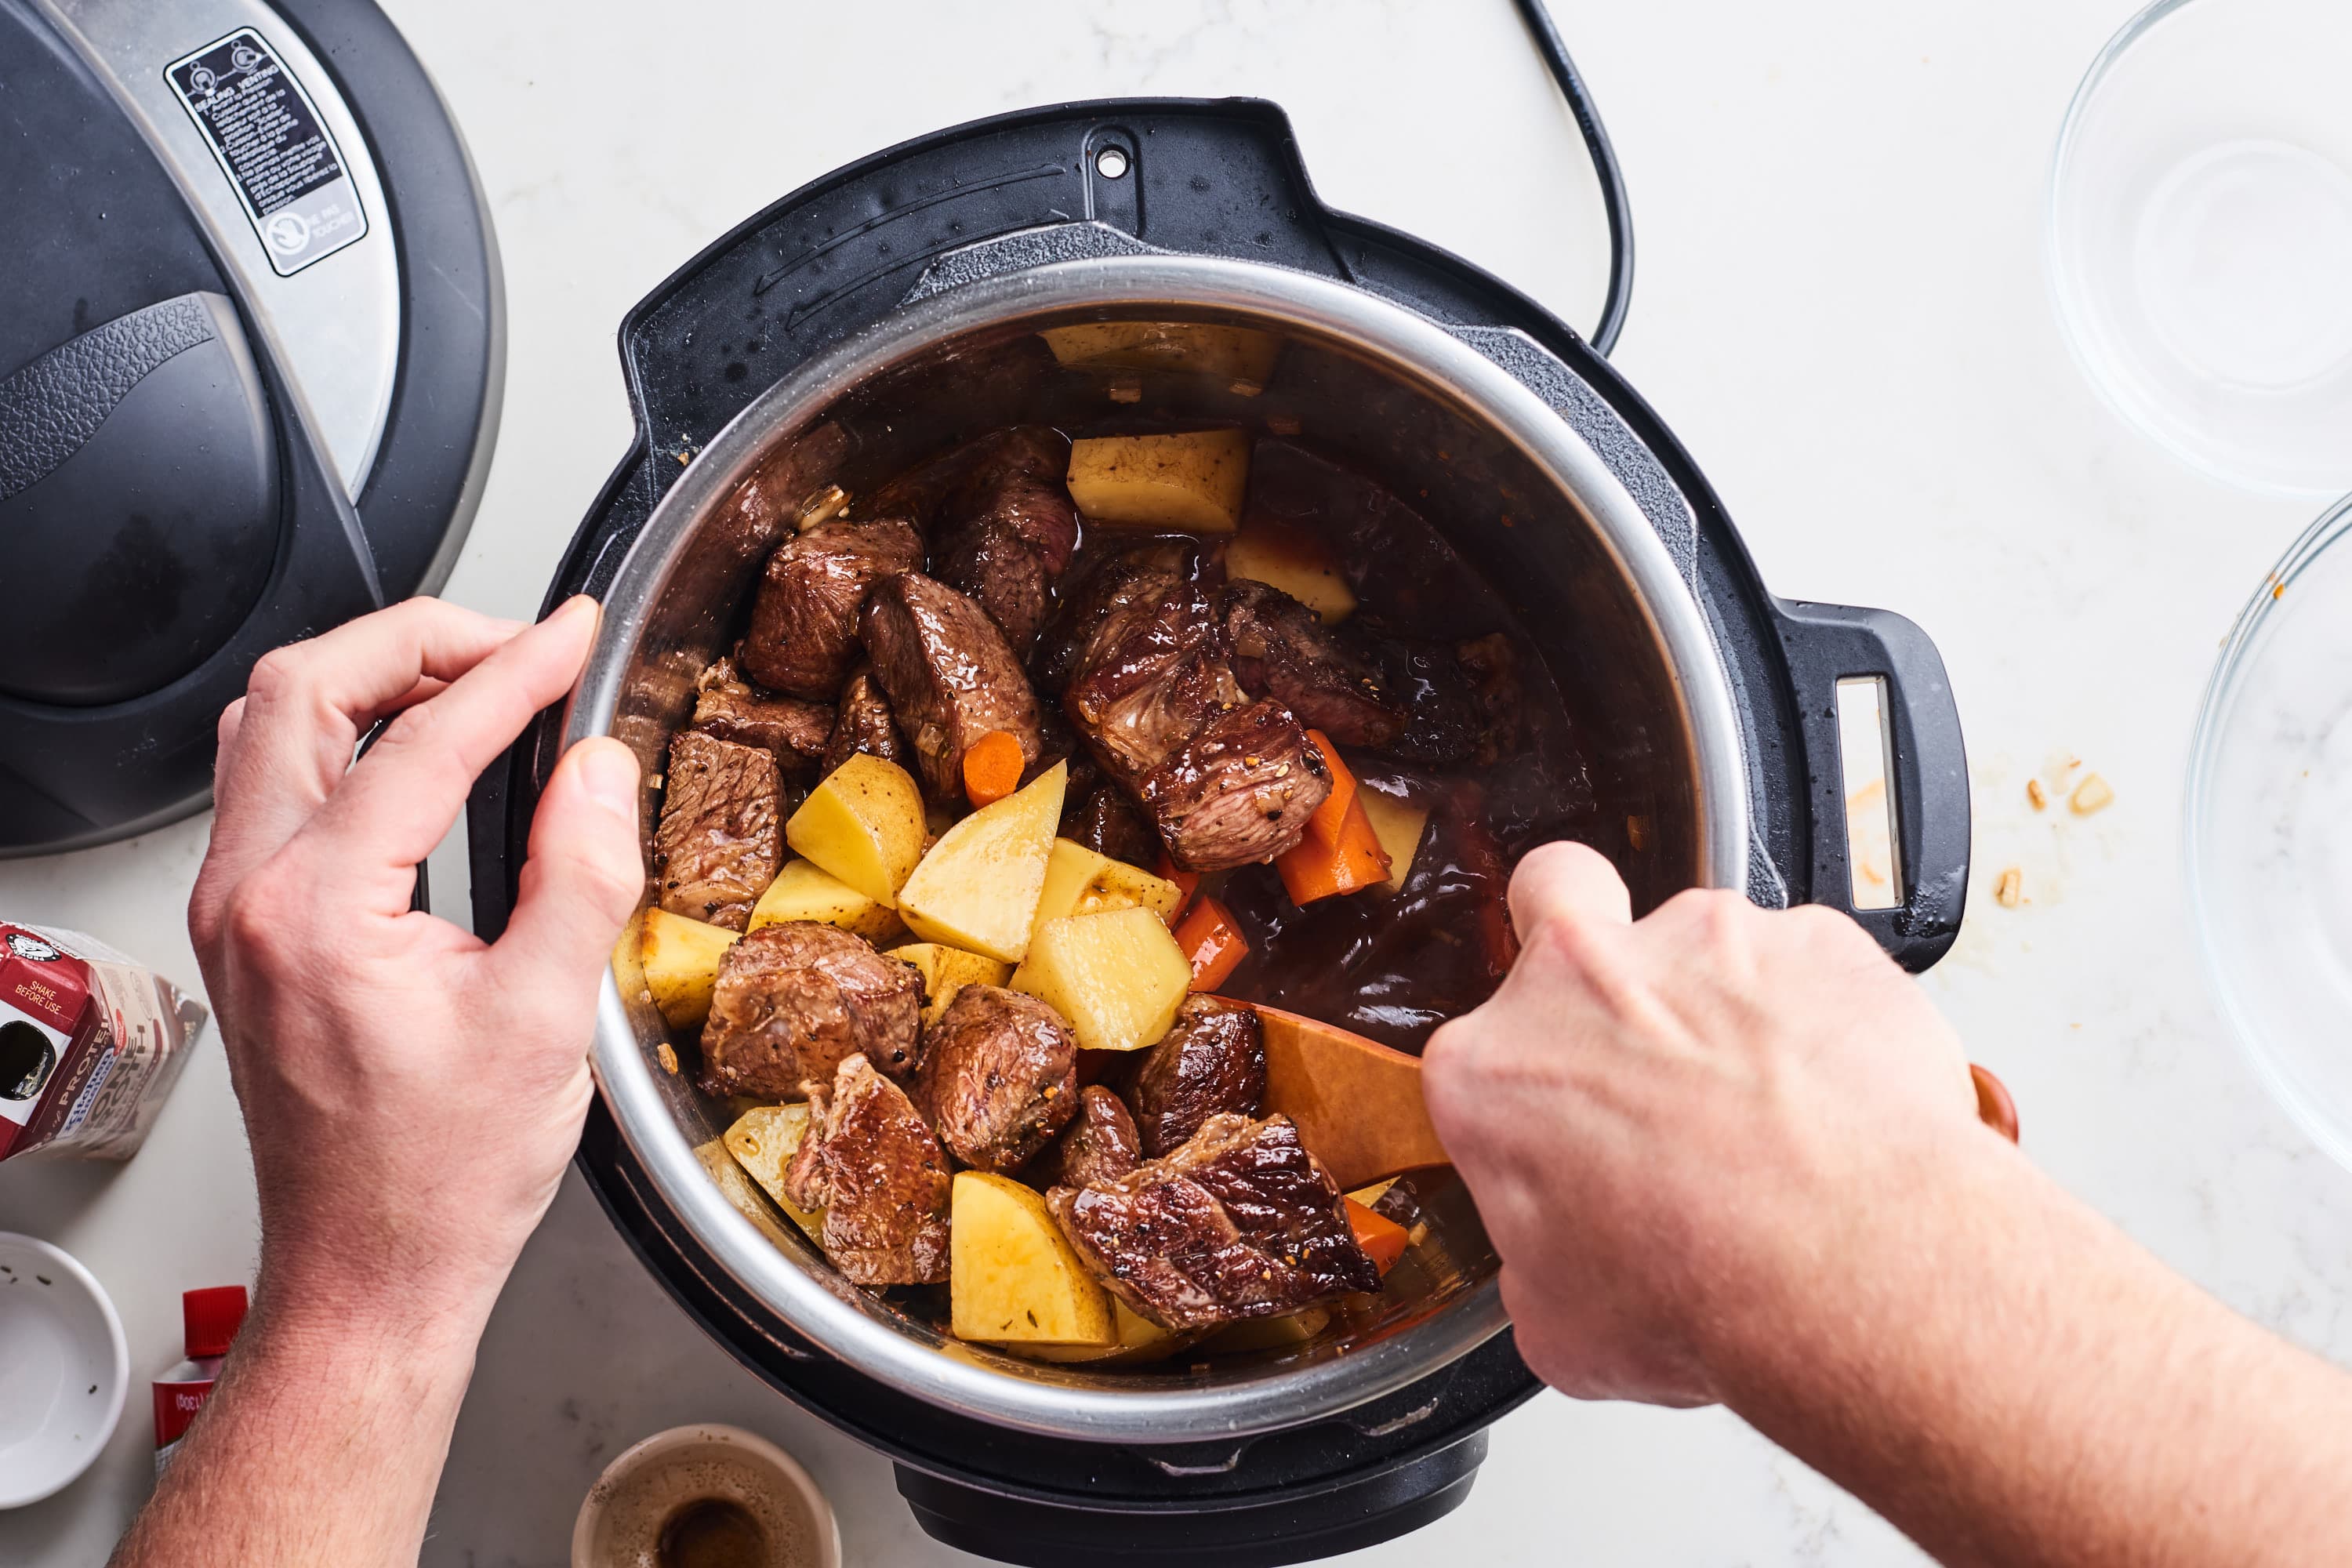 Beef Stew Recipe in Slow Cooker or Instant Pot